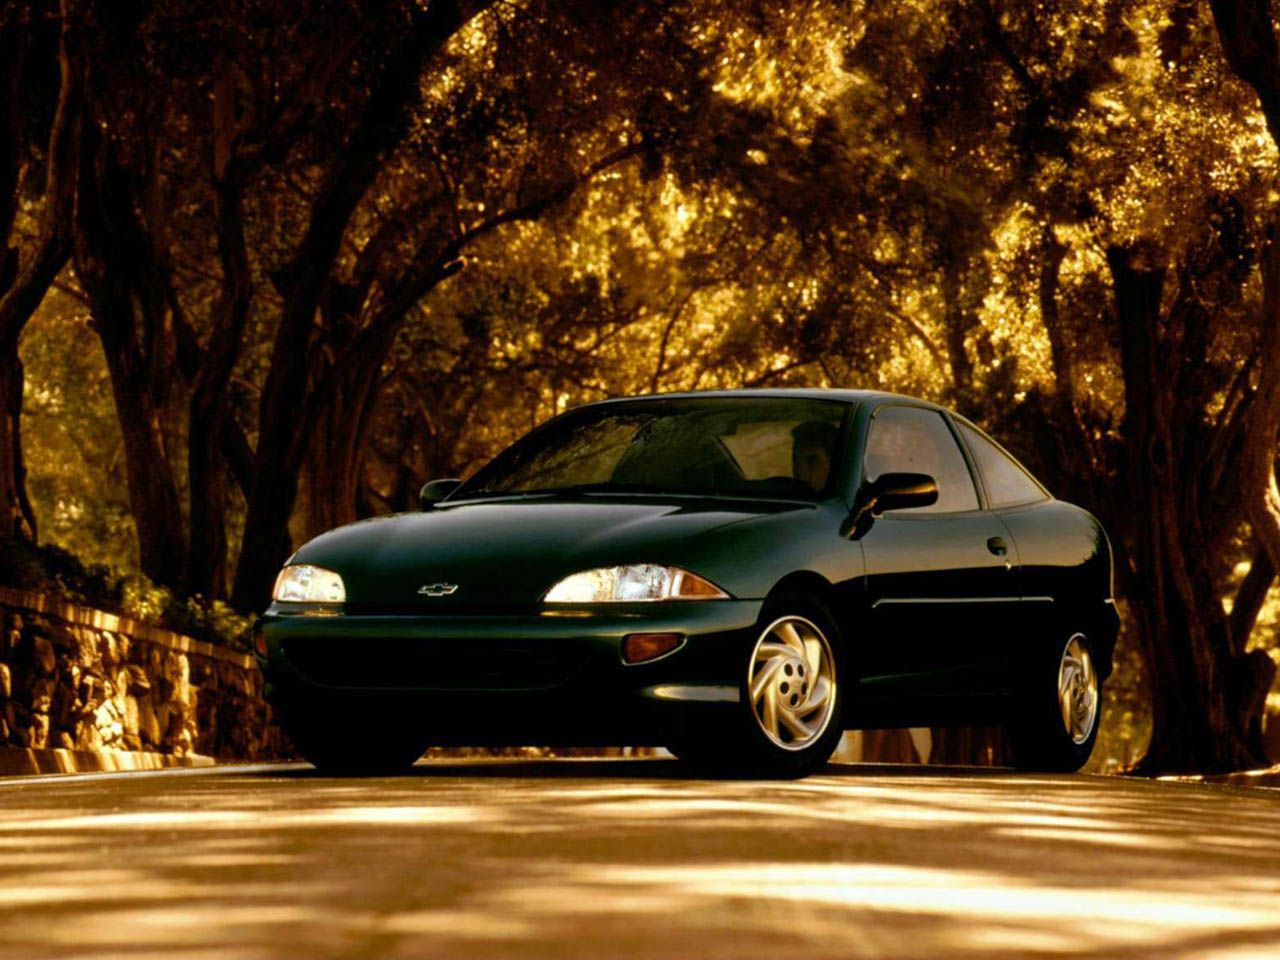 Chevrolet Cavalier 1999 Green Front Angle Wallpaper 1280x960